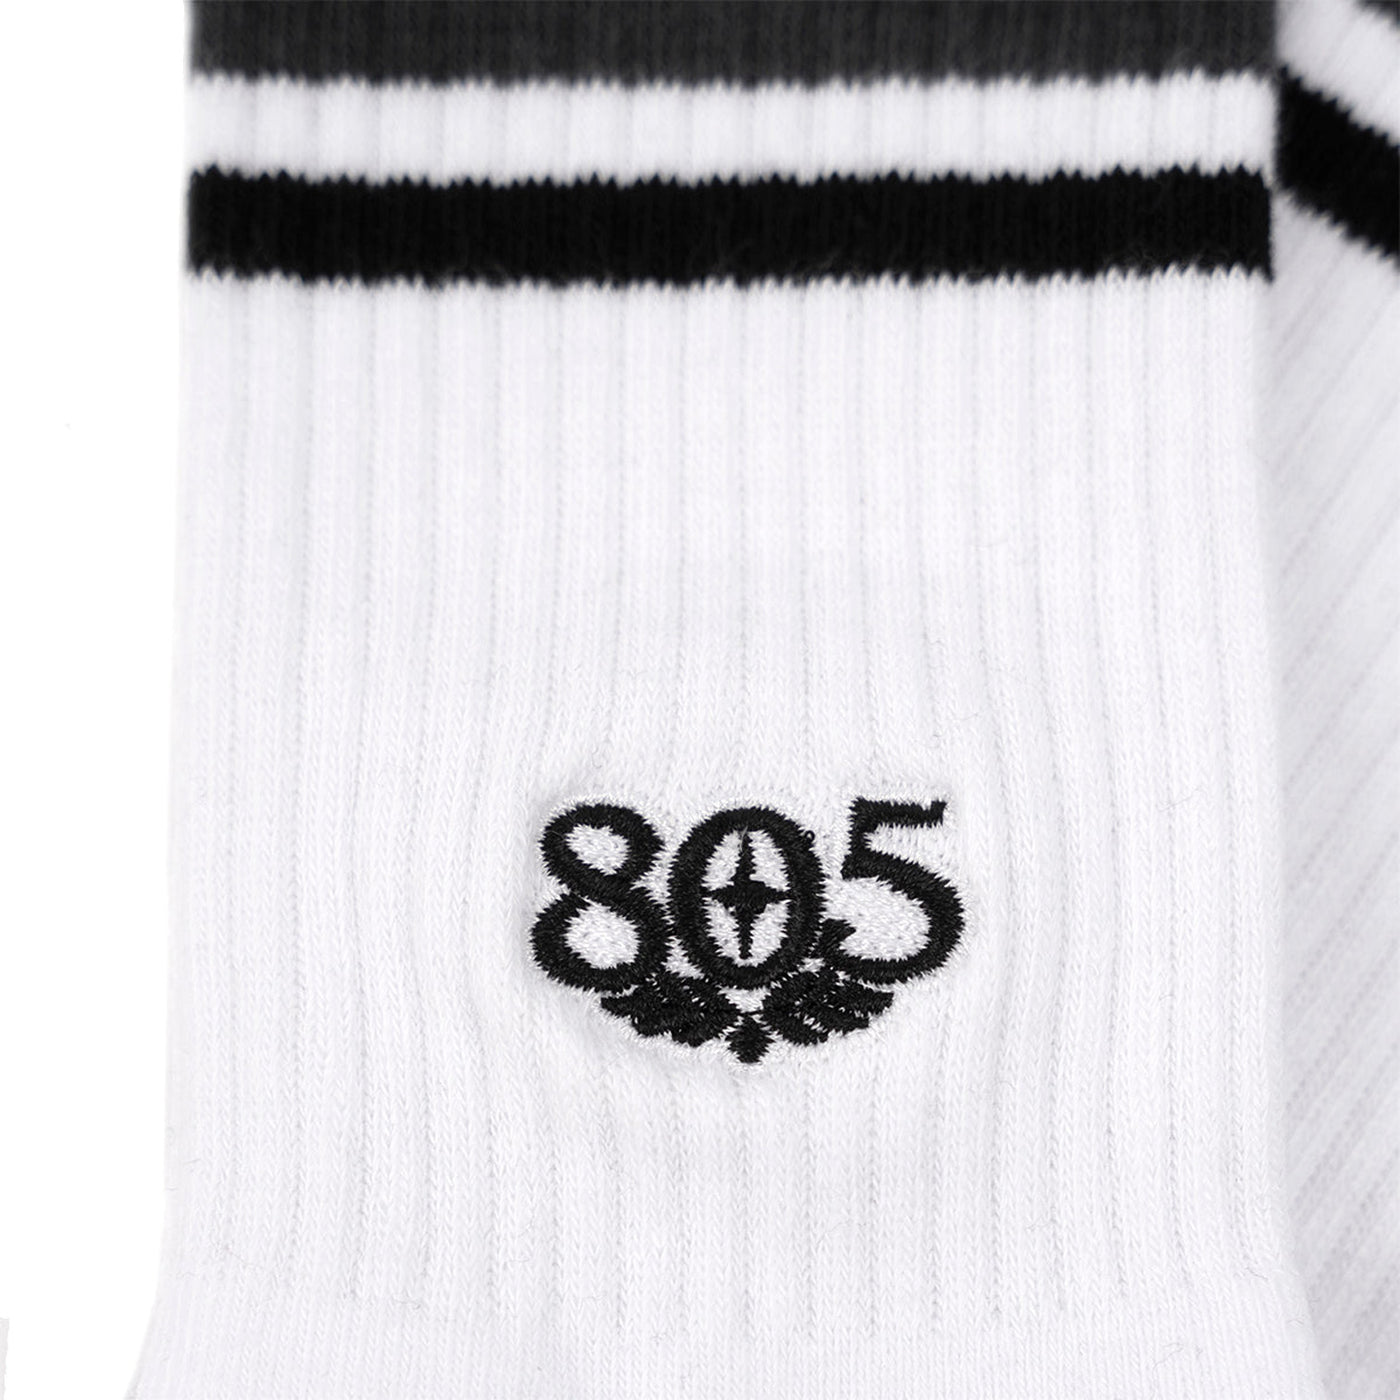 Fasthouse 805 Brew Sock